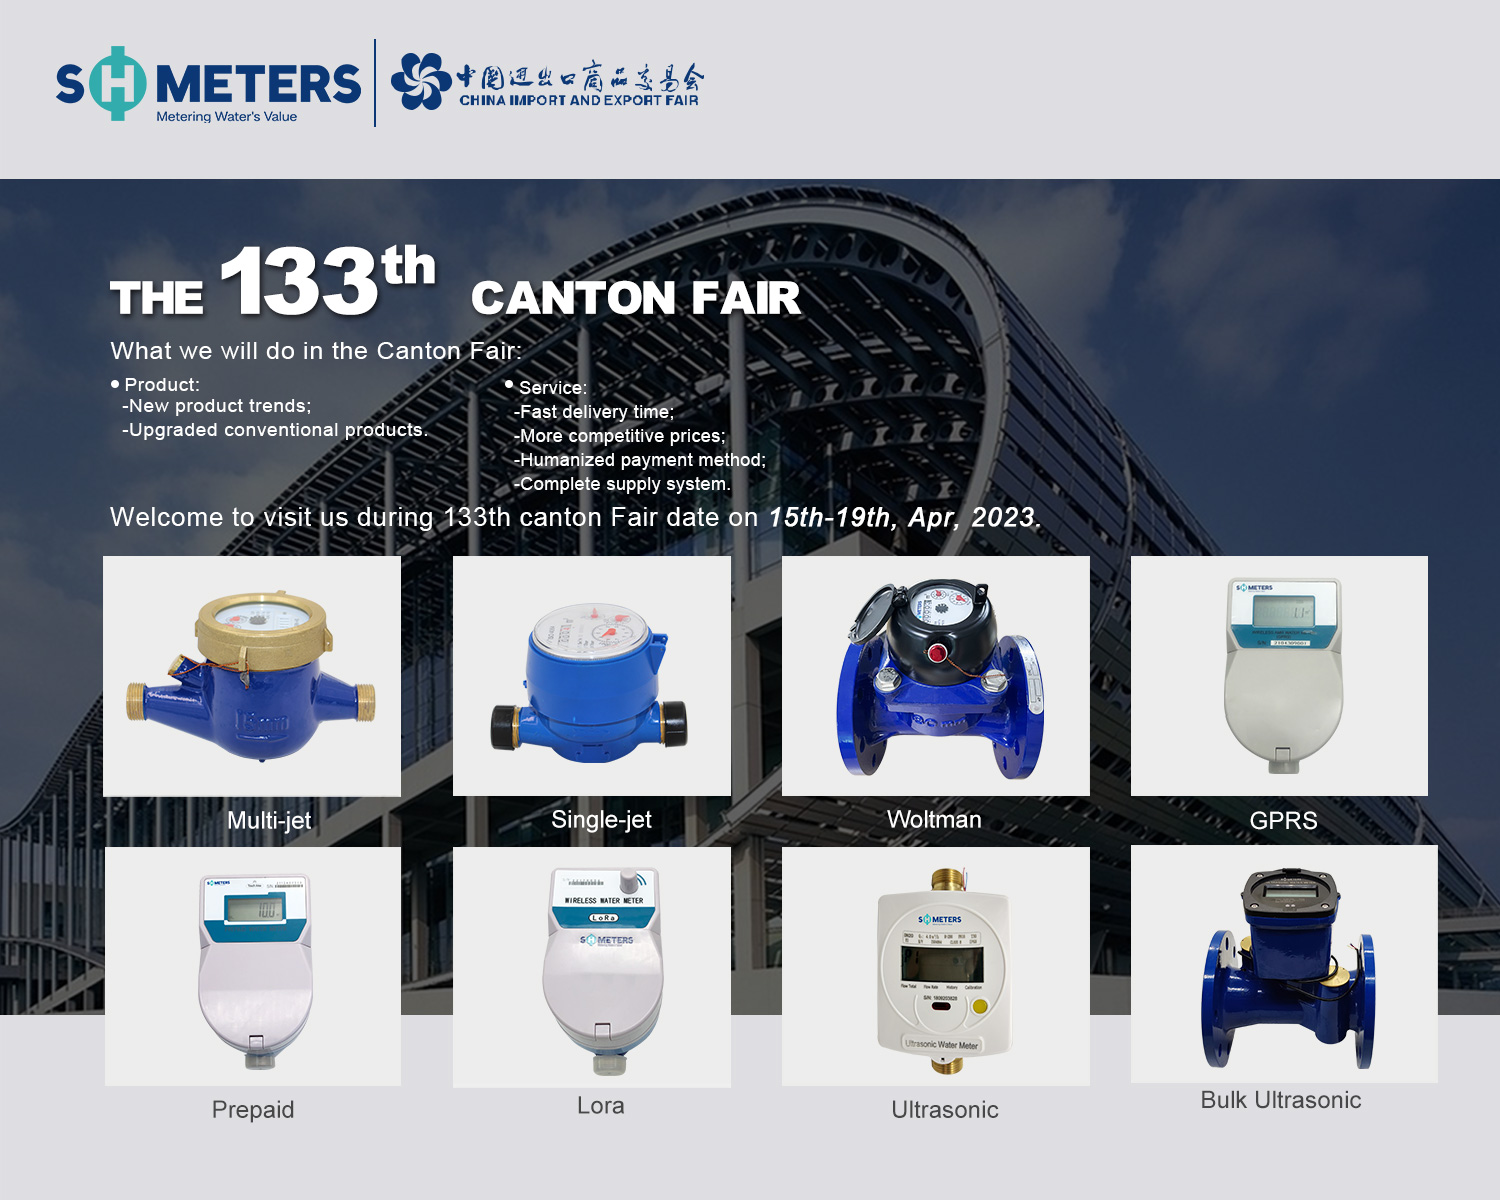 S.H.Meters invites you to visit the 133th Canton Fair